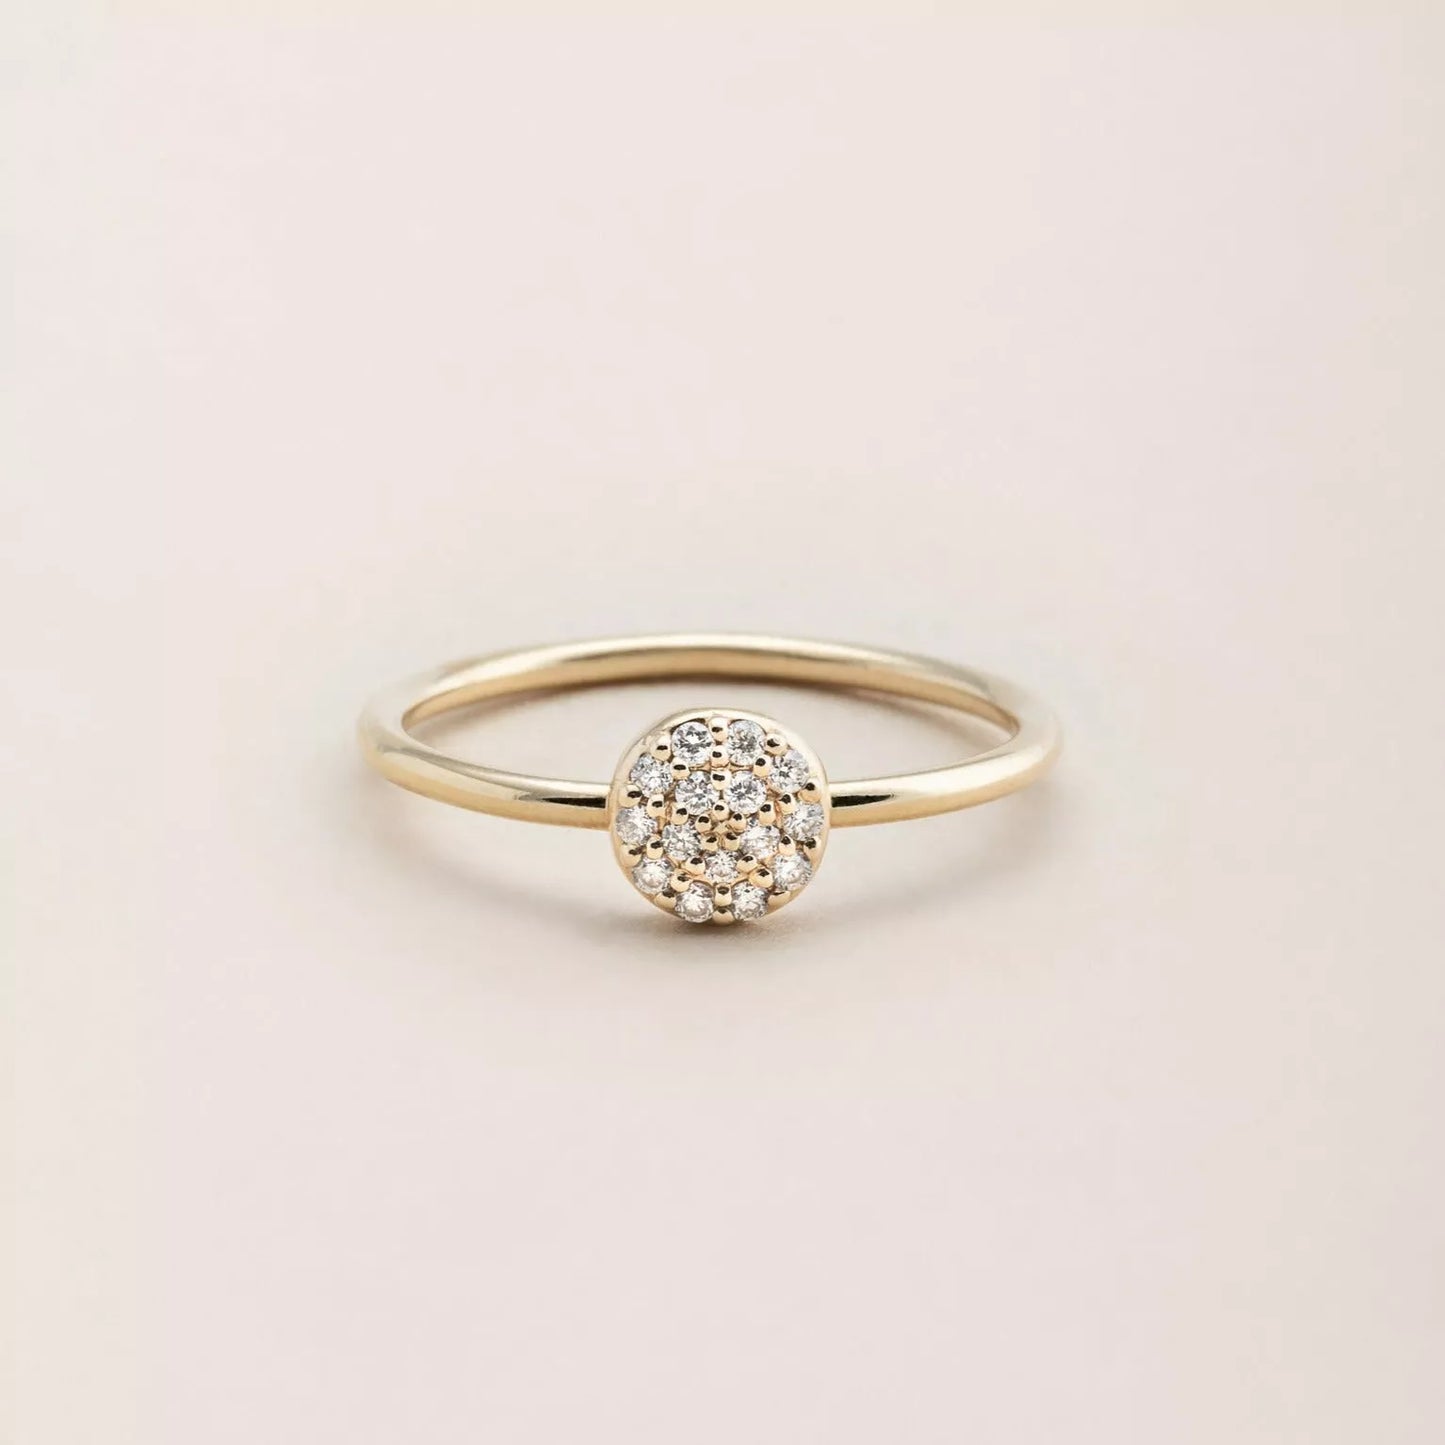 The Round Dainty Ring. Recycle Gold 